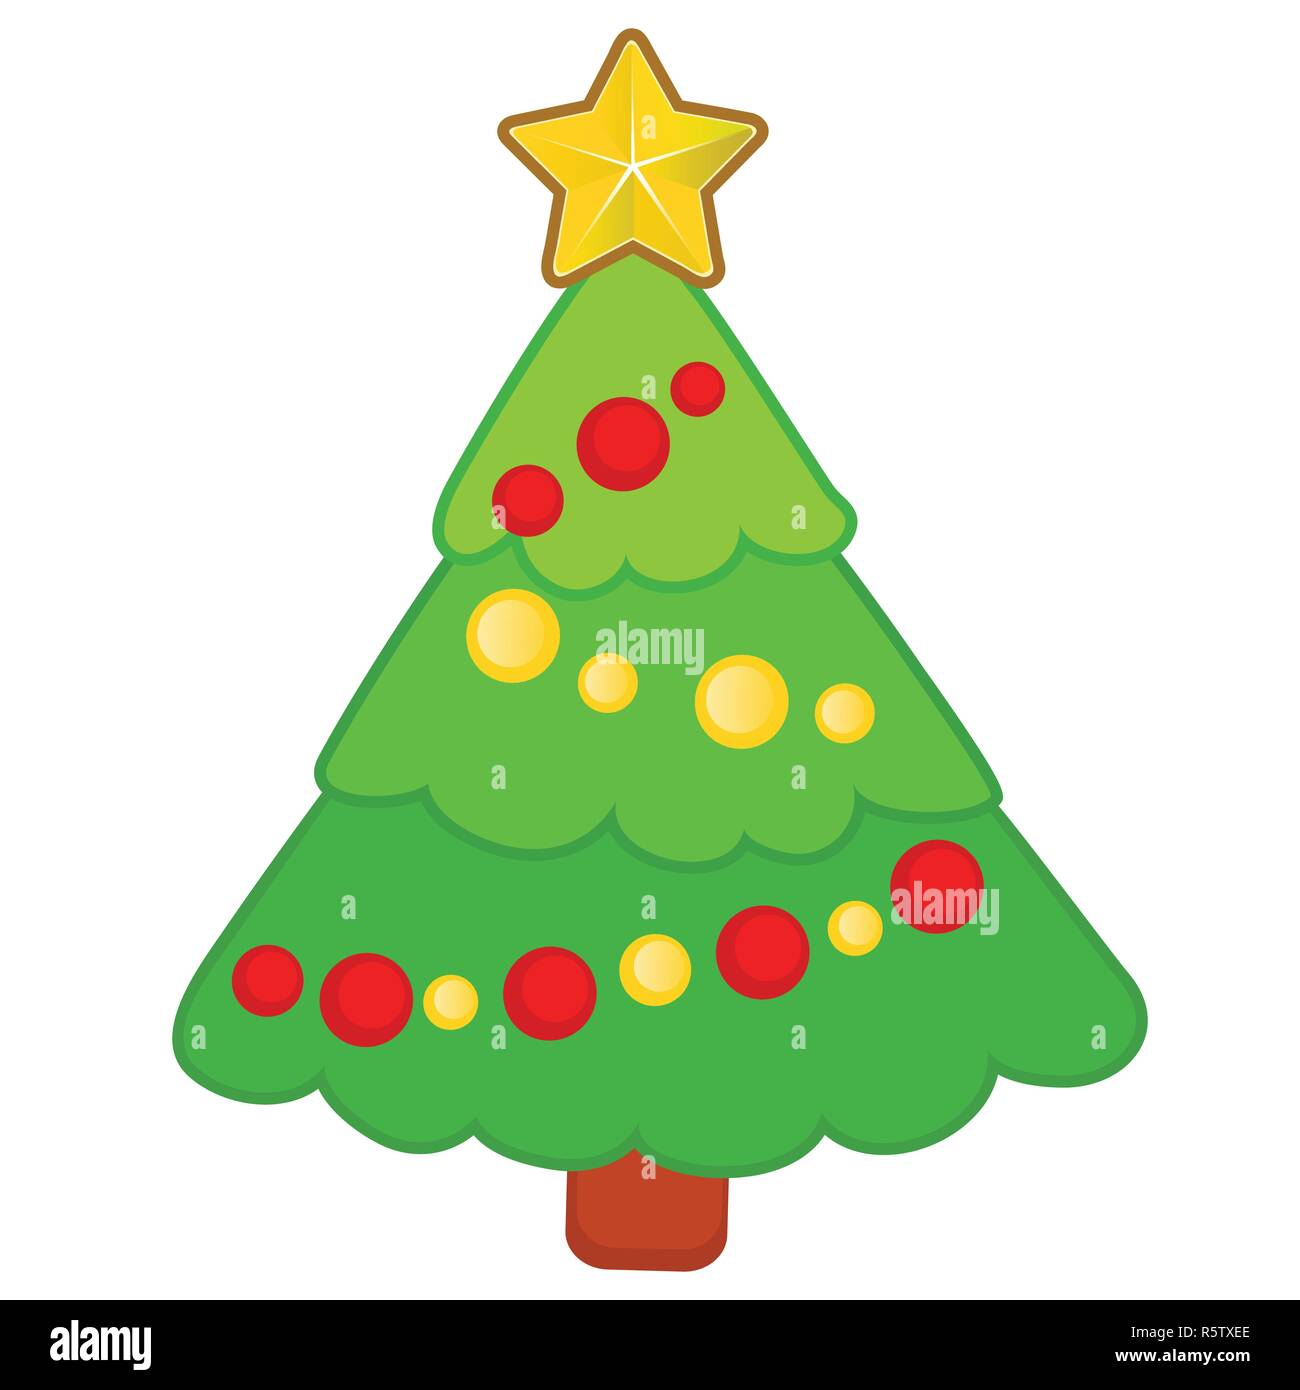 Drawn funny Christmas tree with ornaments isolated on a white background. Sketch of Christmas festive poster, party invitation, other holiday card. Vector cartoon close-up illustration. Stock Vector